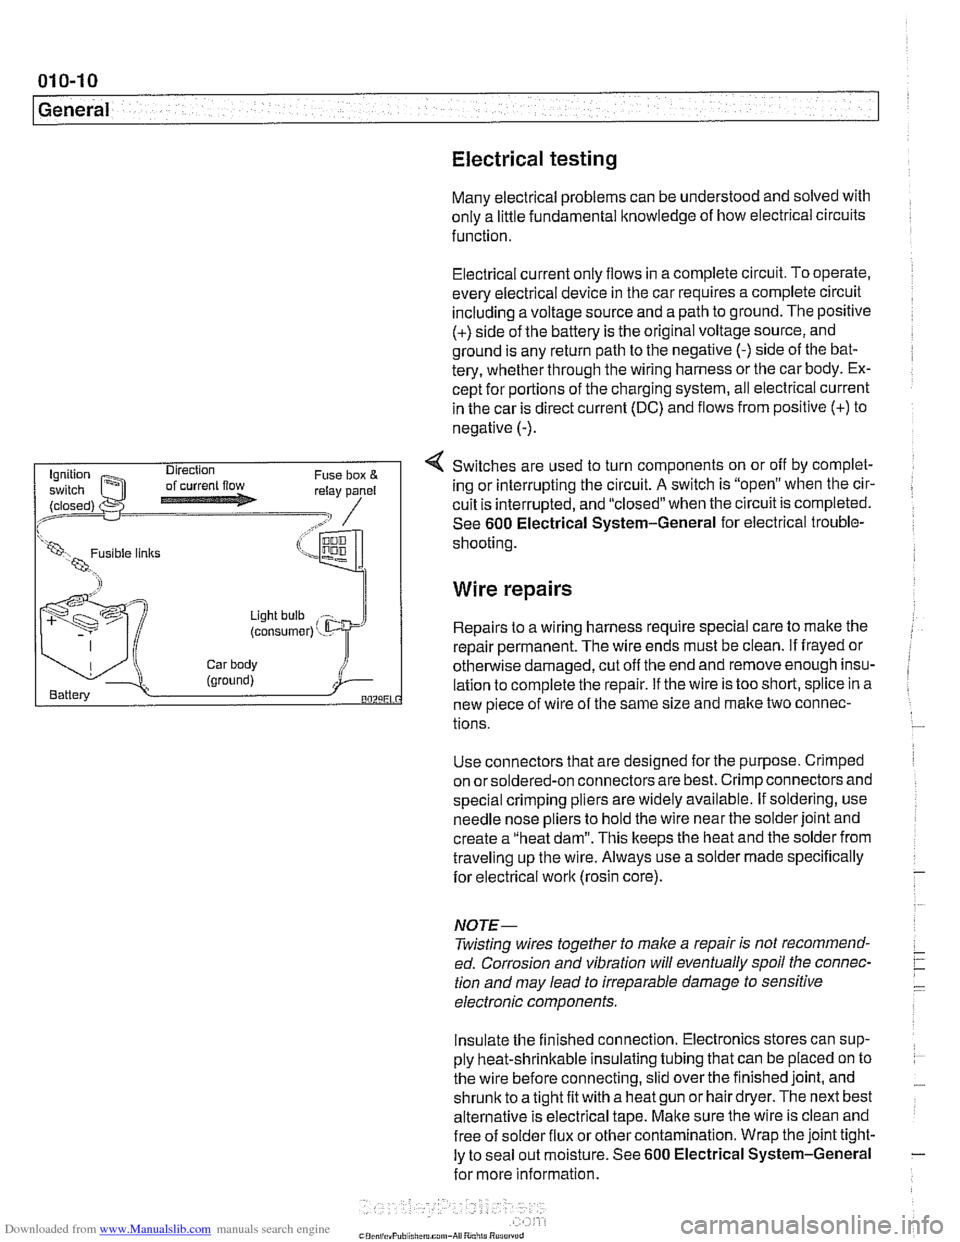 BMW 525i 2001 E39 Workshop Manual Downloaded from www.Manualslib.com manuals search engine 
01 0-1 0 
General 
Electrical testing 
Many electrical problems  can be understood and solved with 
only a little fundamental  knowledge  of h